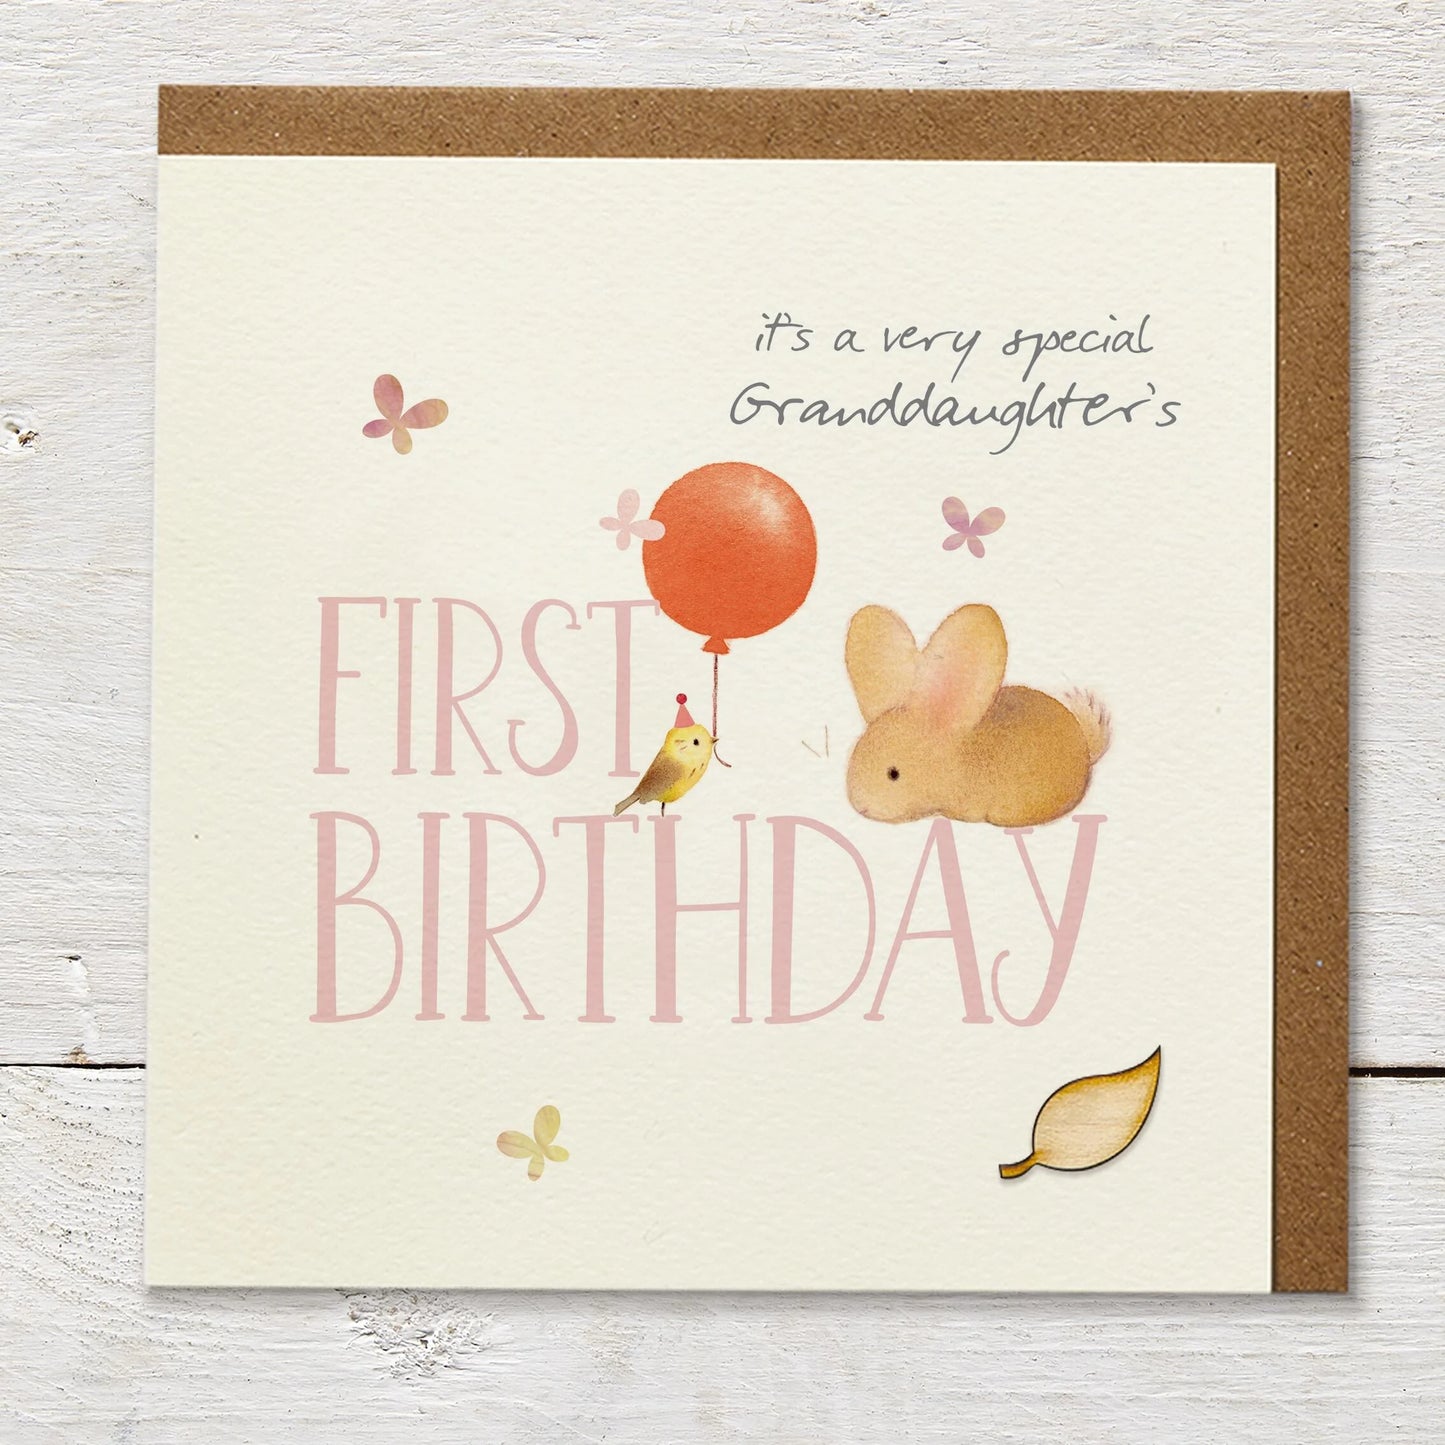 Granddaughter’s First Birthday Greeting Card